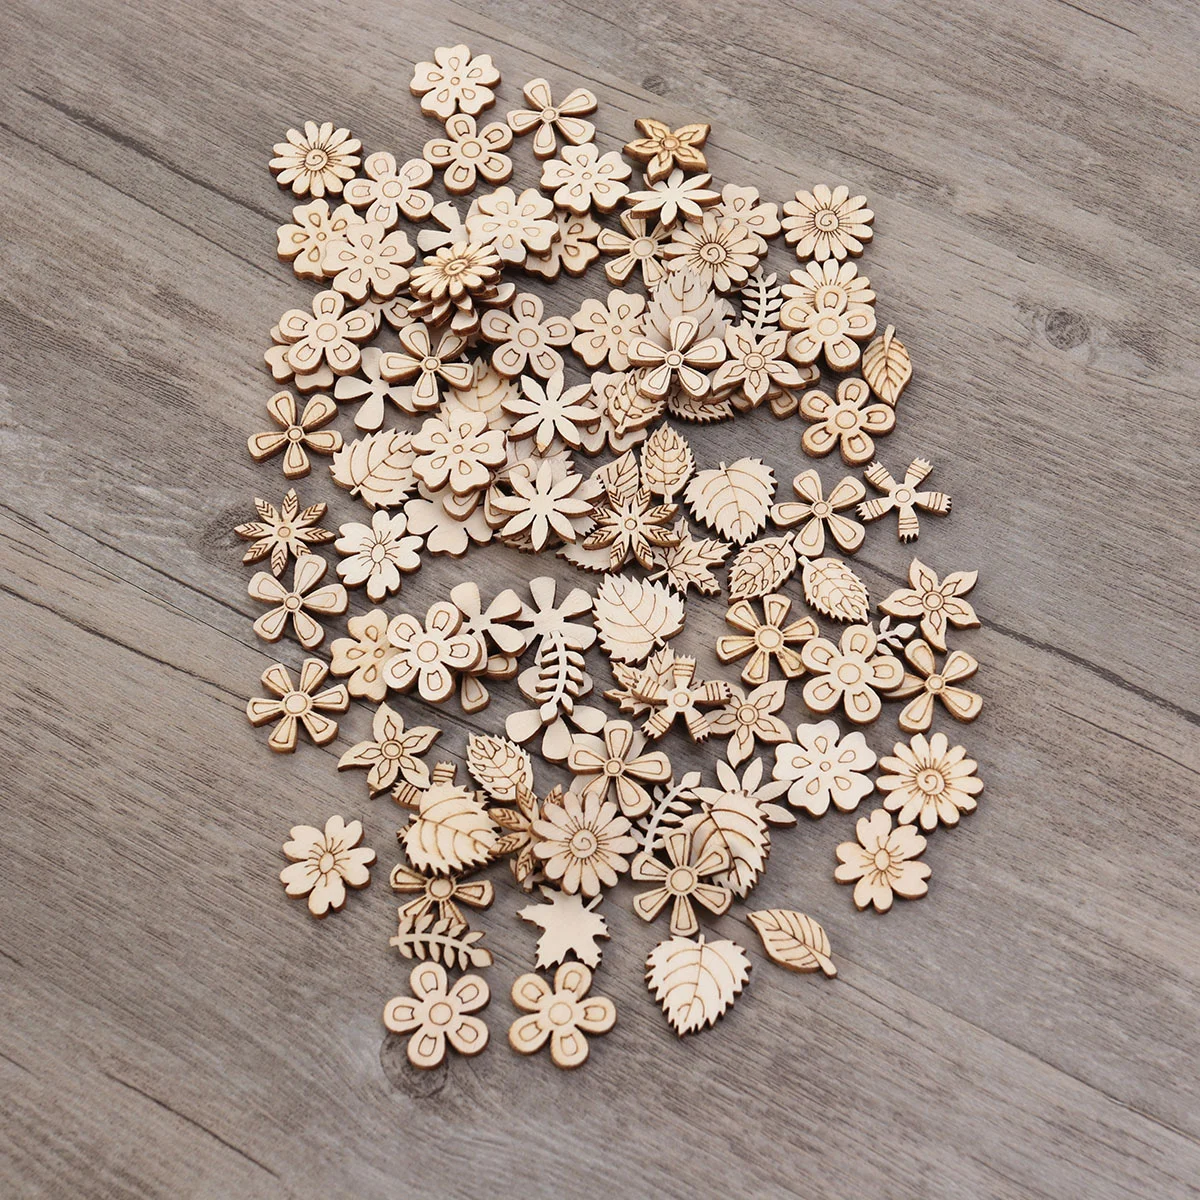 

Wood Wooden Flower Craft Shapes Cutouts Discs Cutout Slices Unfinished Crafts Pieces Embellishments Gift Leaf Tag Tags Pattern